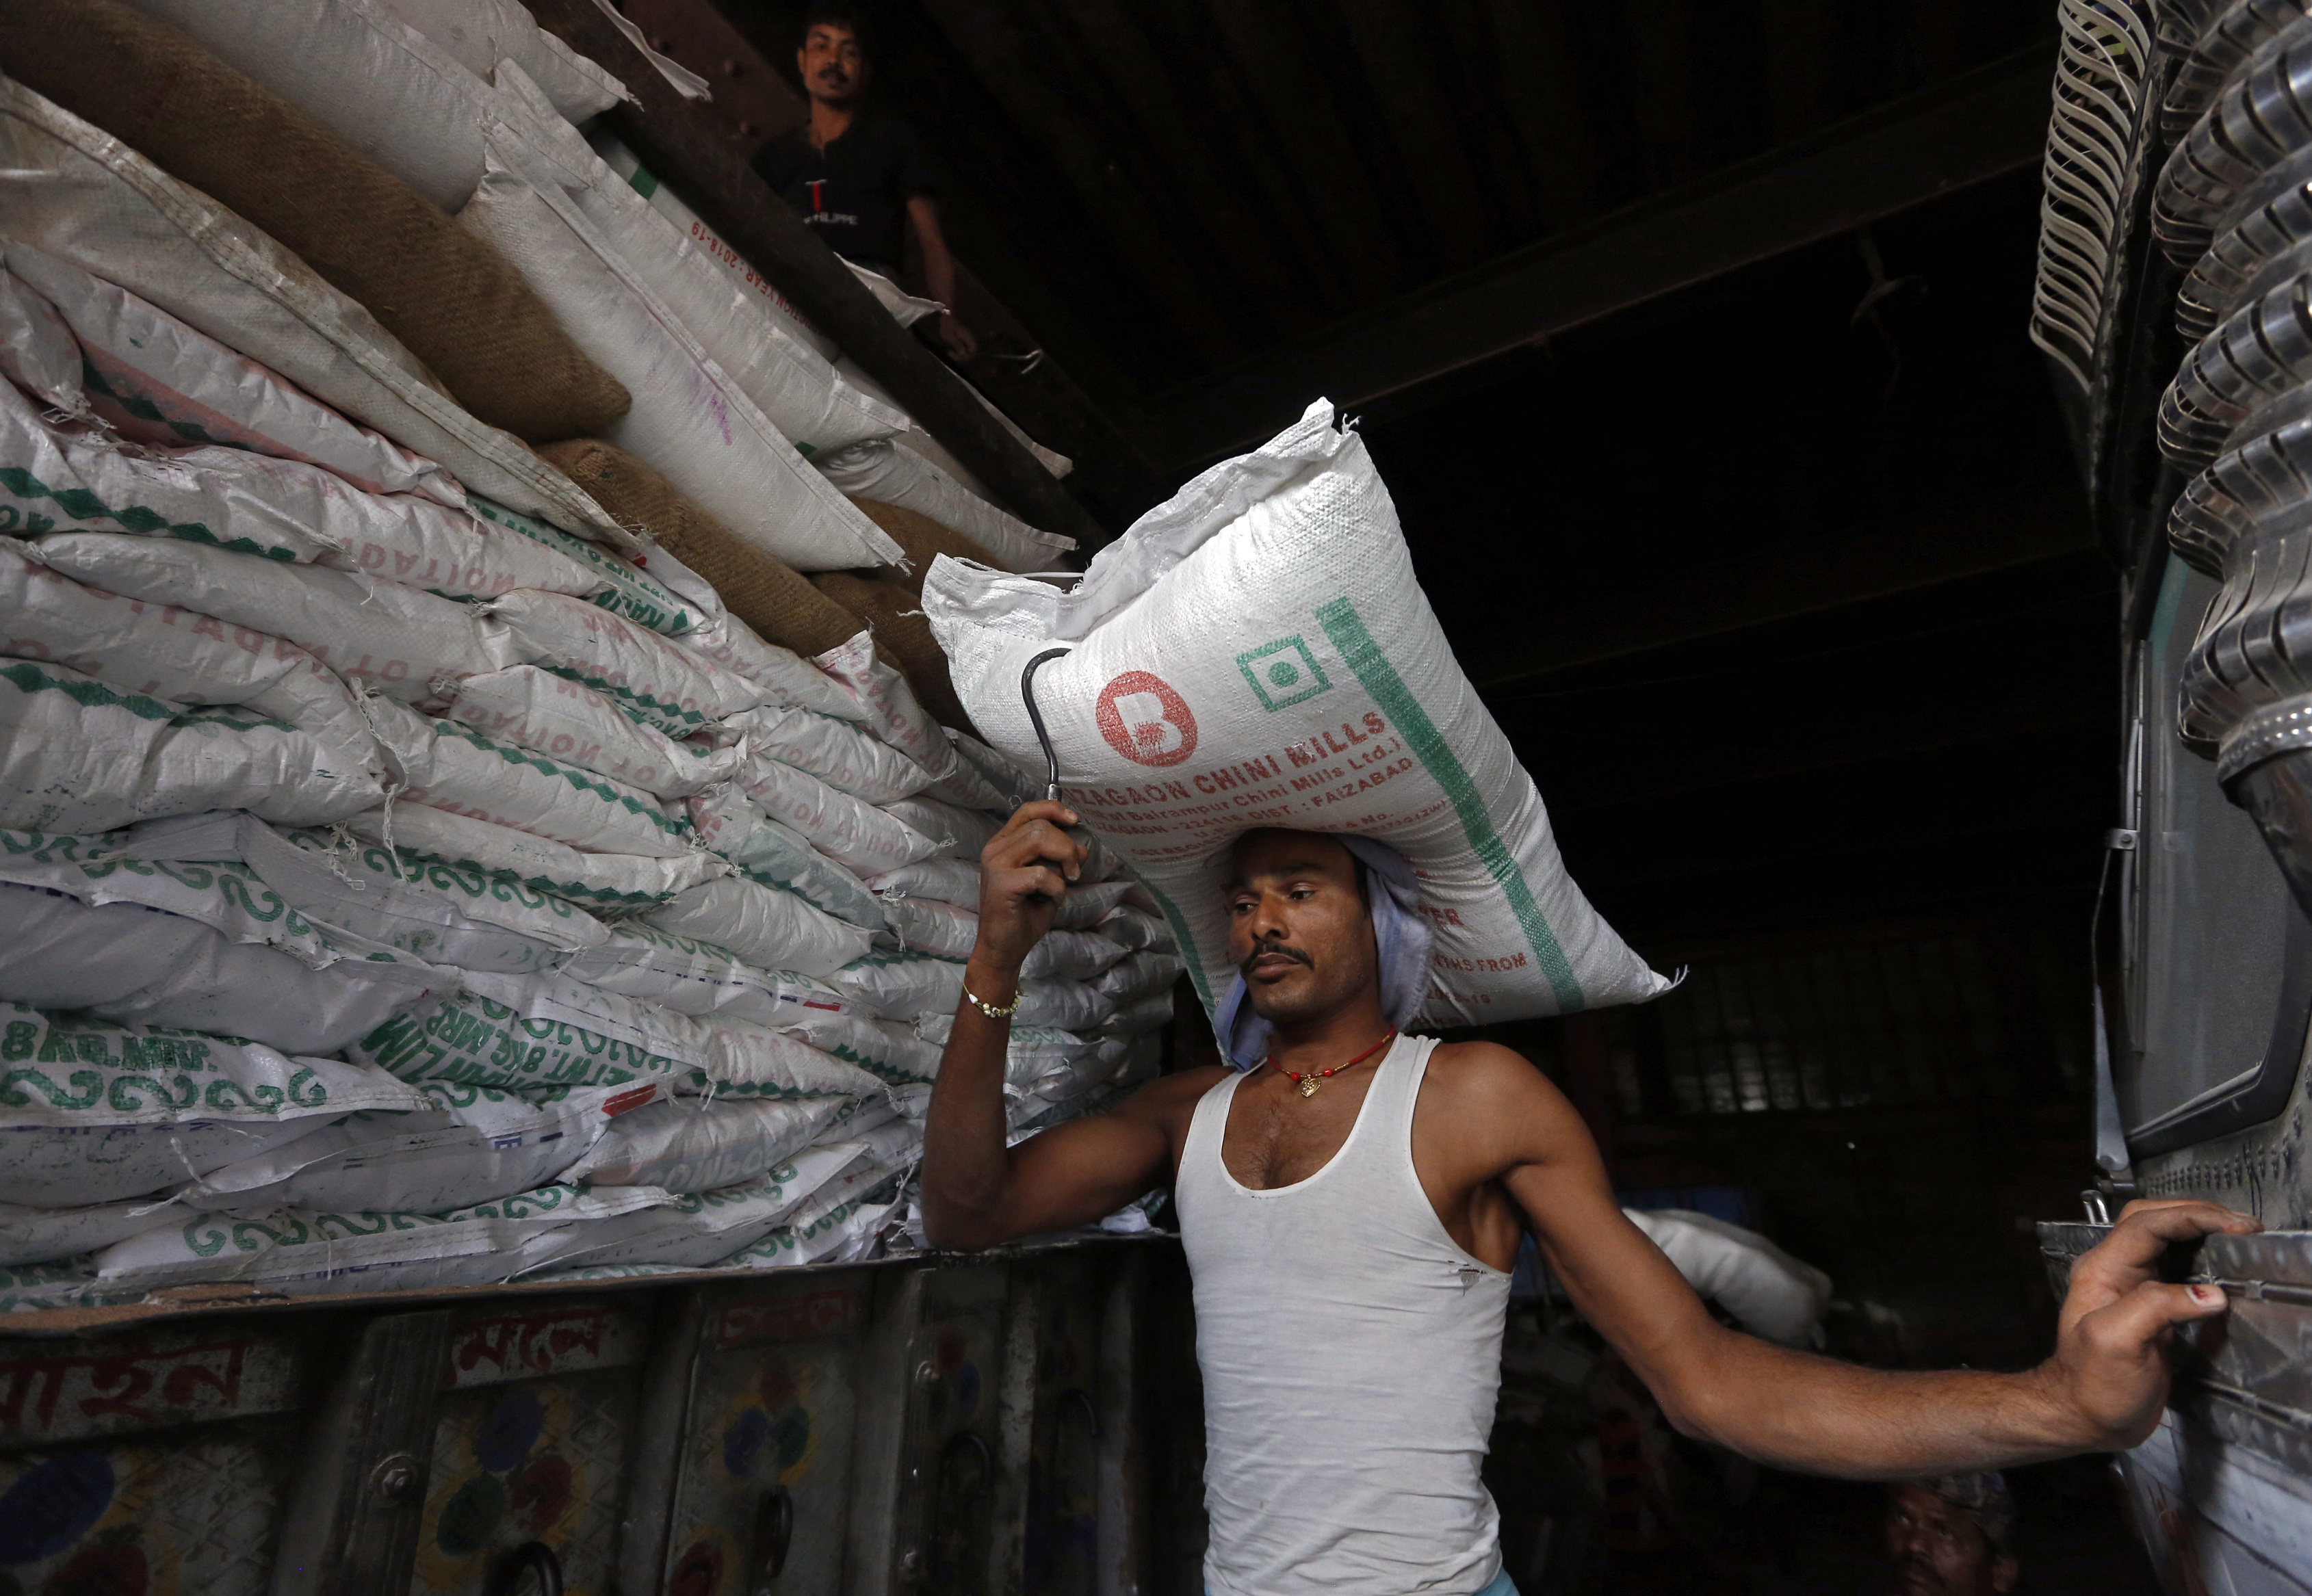 A labourer carries a sack of sugar to load it onto a supply truck at a market area in Kolkata